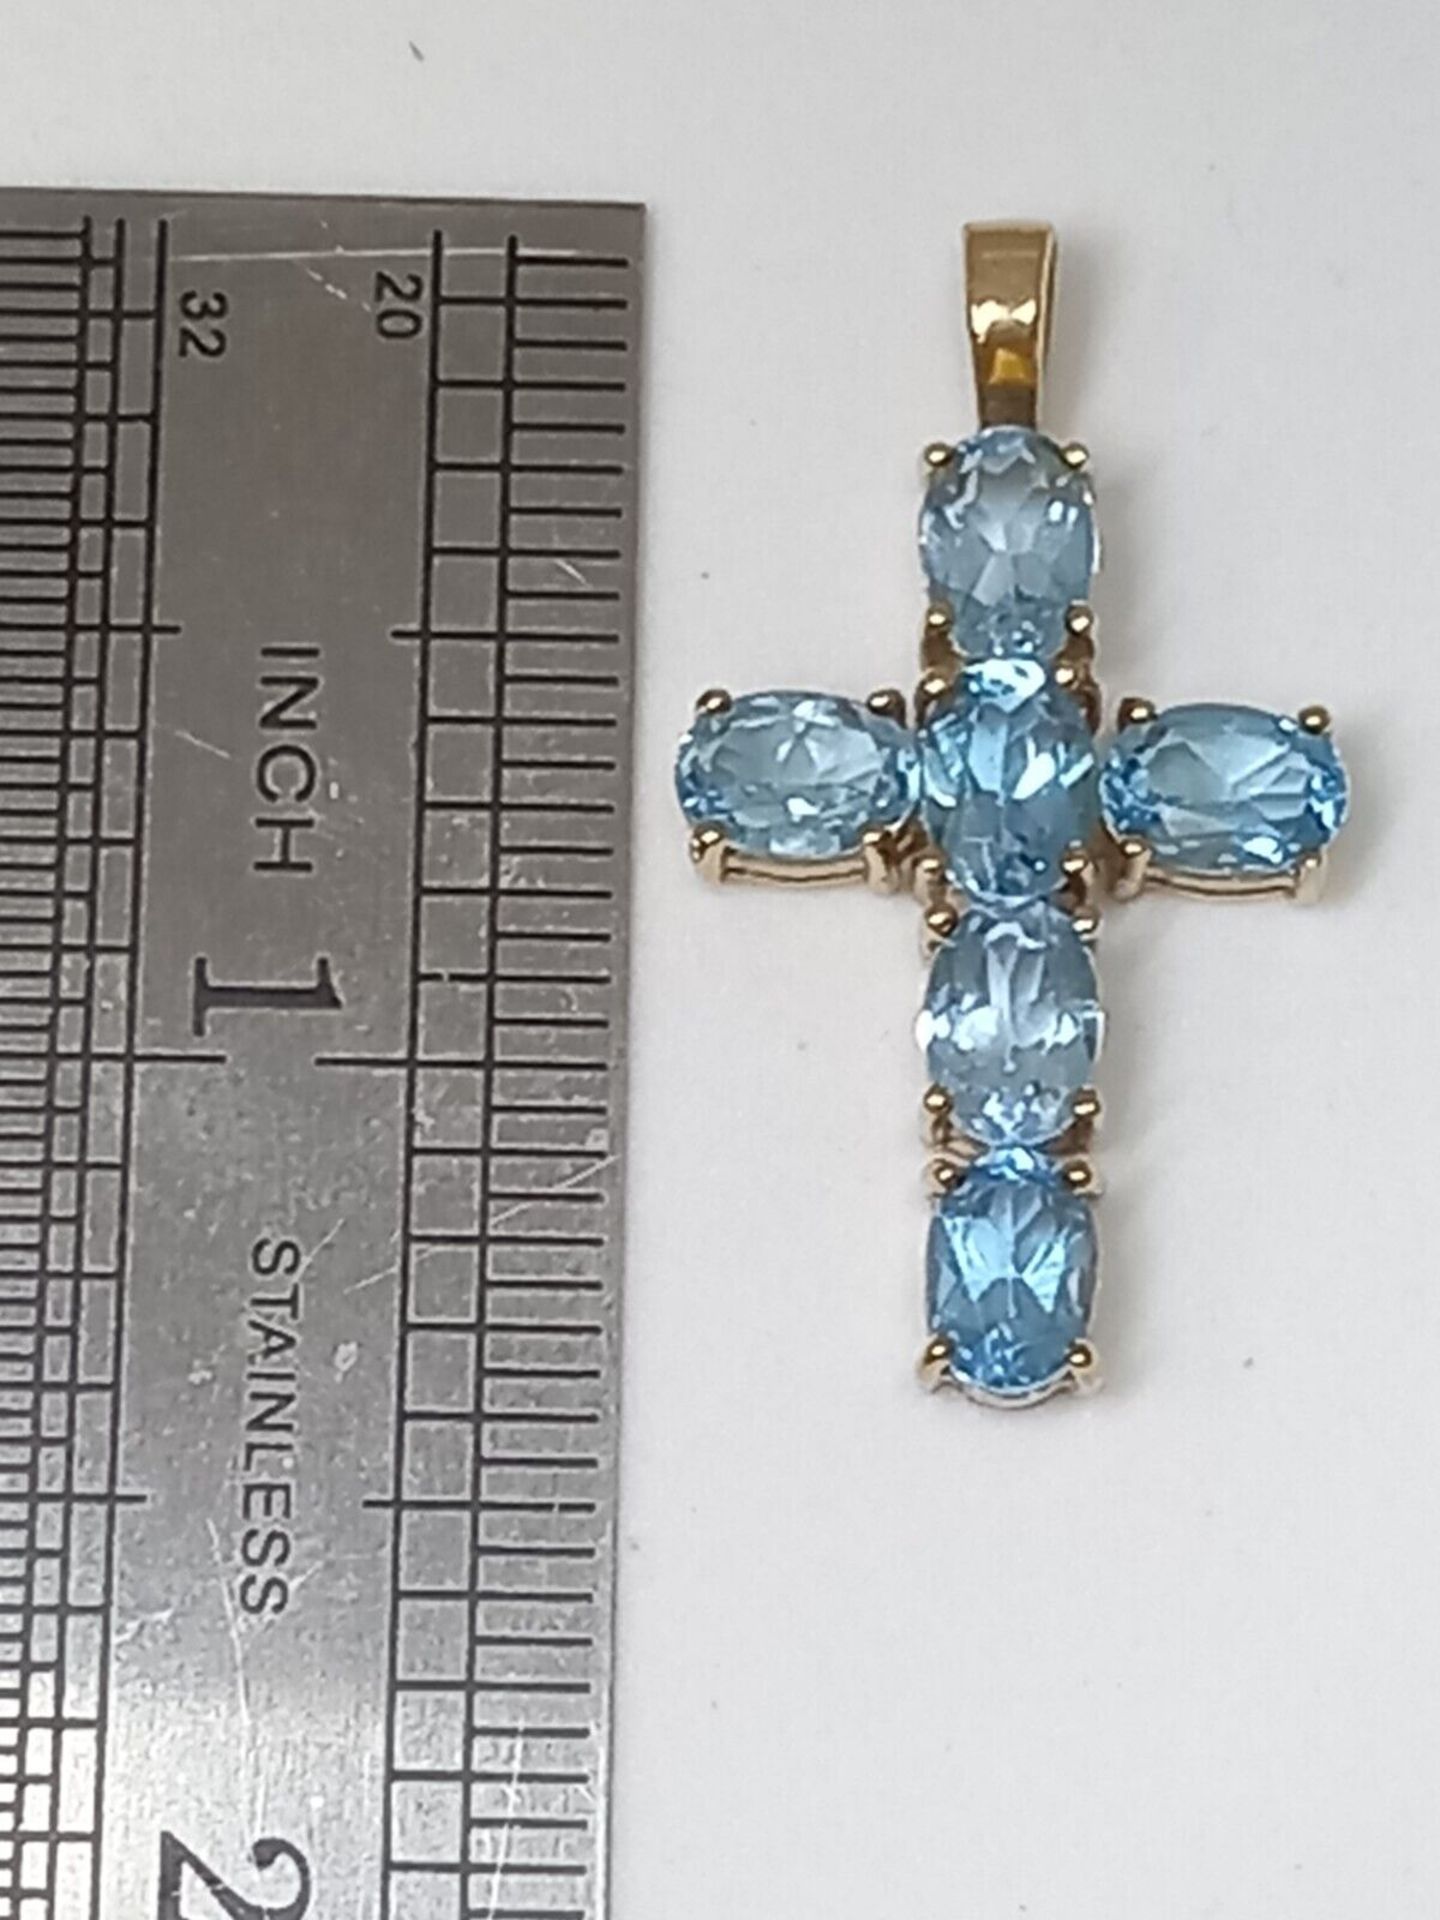 BLUE OVAL TOPAZ CROSS 9CT YELLOW GOLD IN GIFT BOX WITH VALUATION CERTIFICATE OF £895 - Image 4 of 6